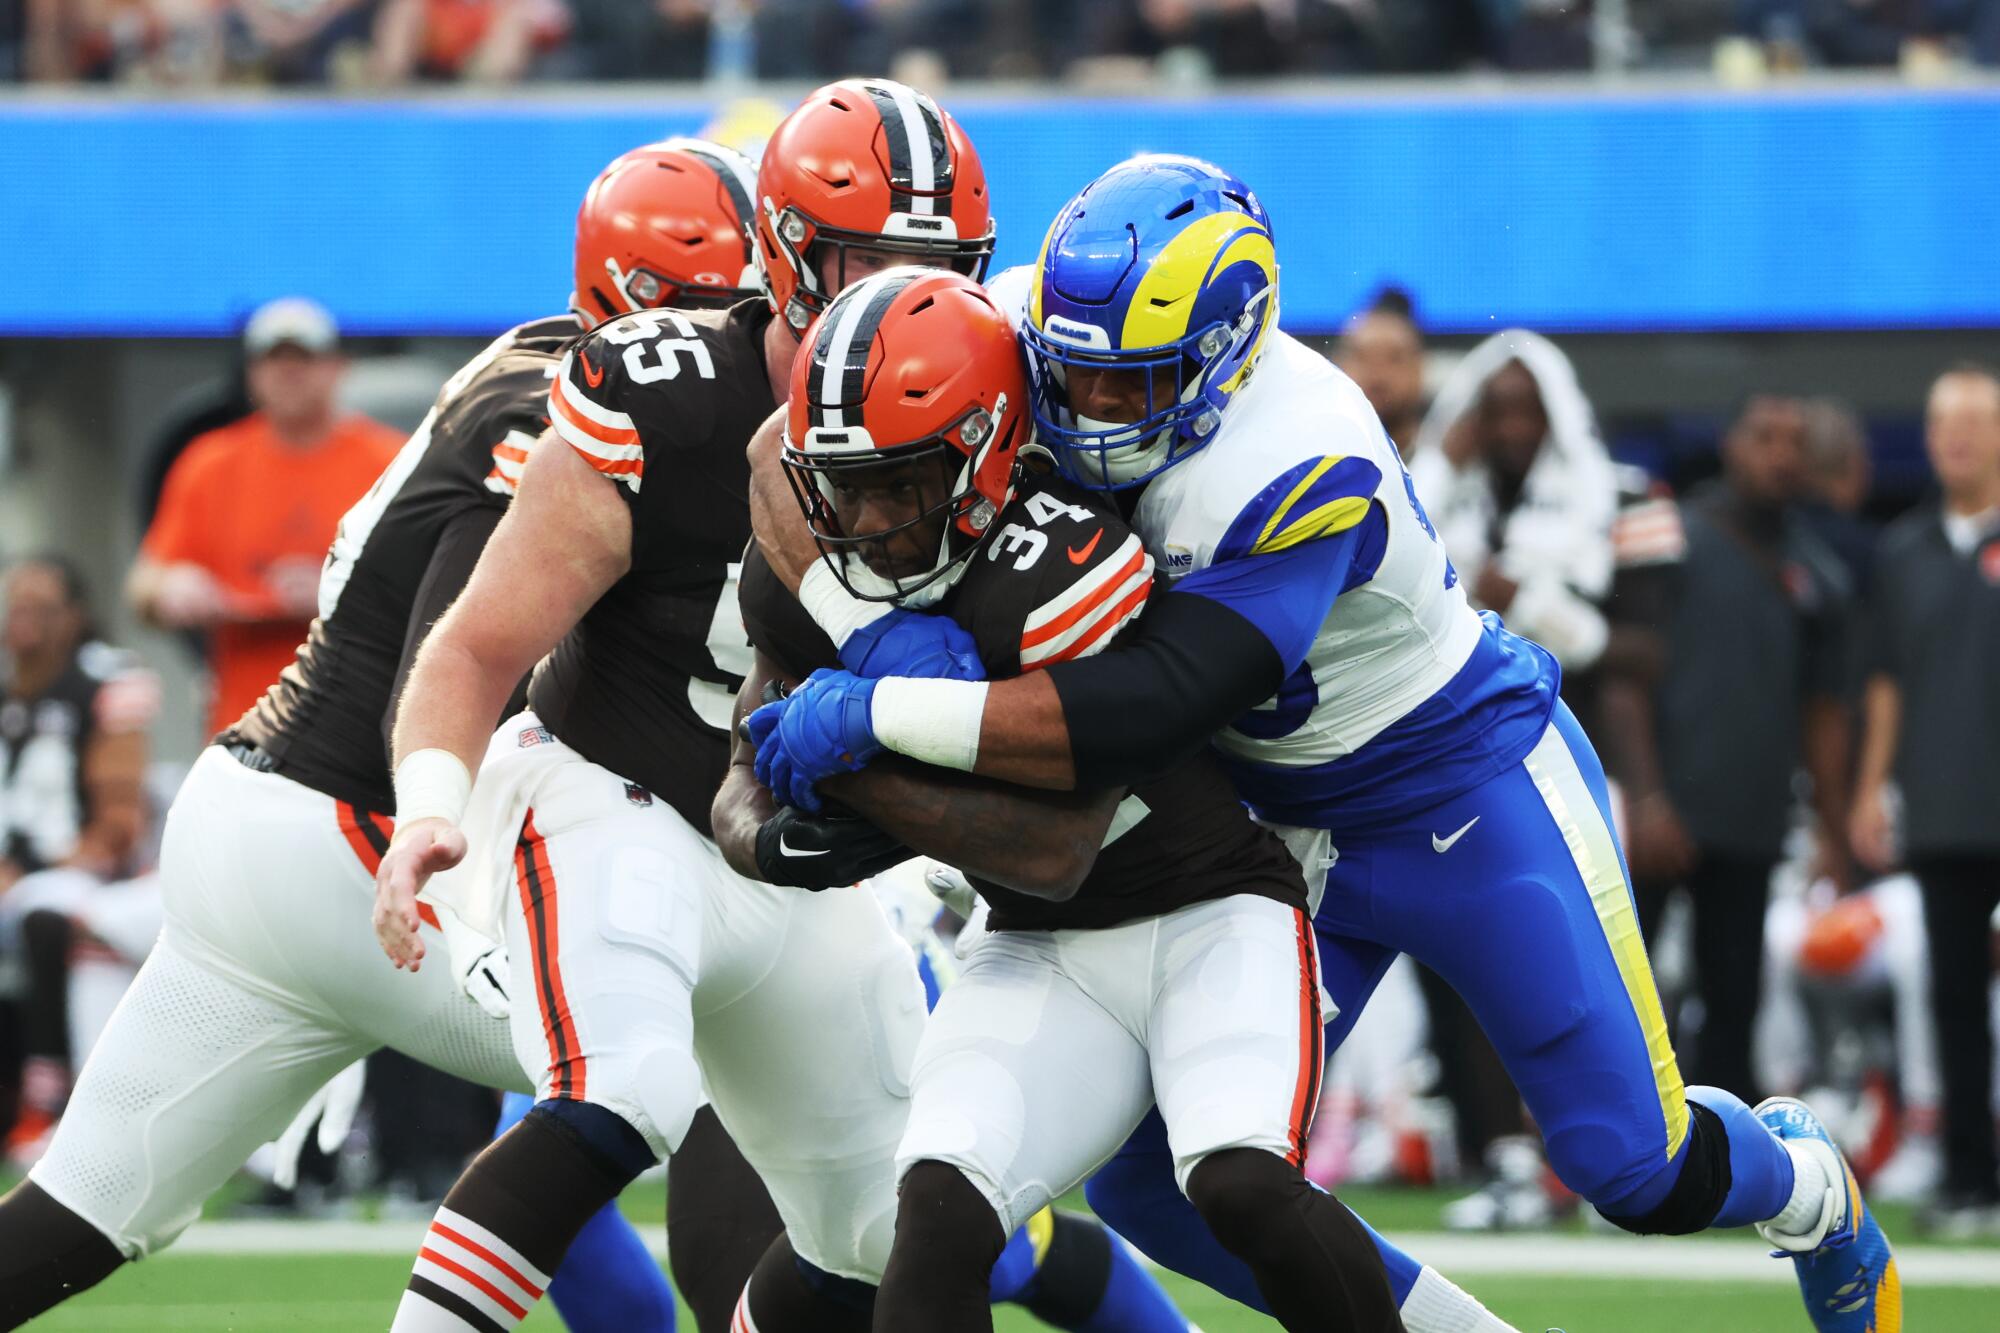 Rams defensive tackle Aaron Donald wraps up Cleveland Browns running back Jerome Ford for a loss.